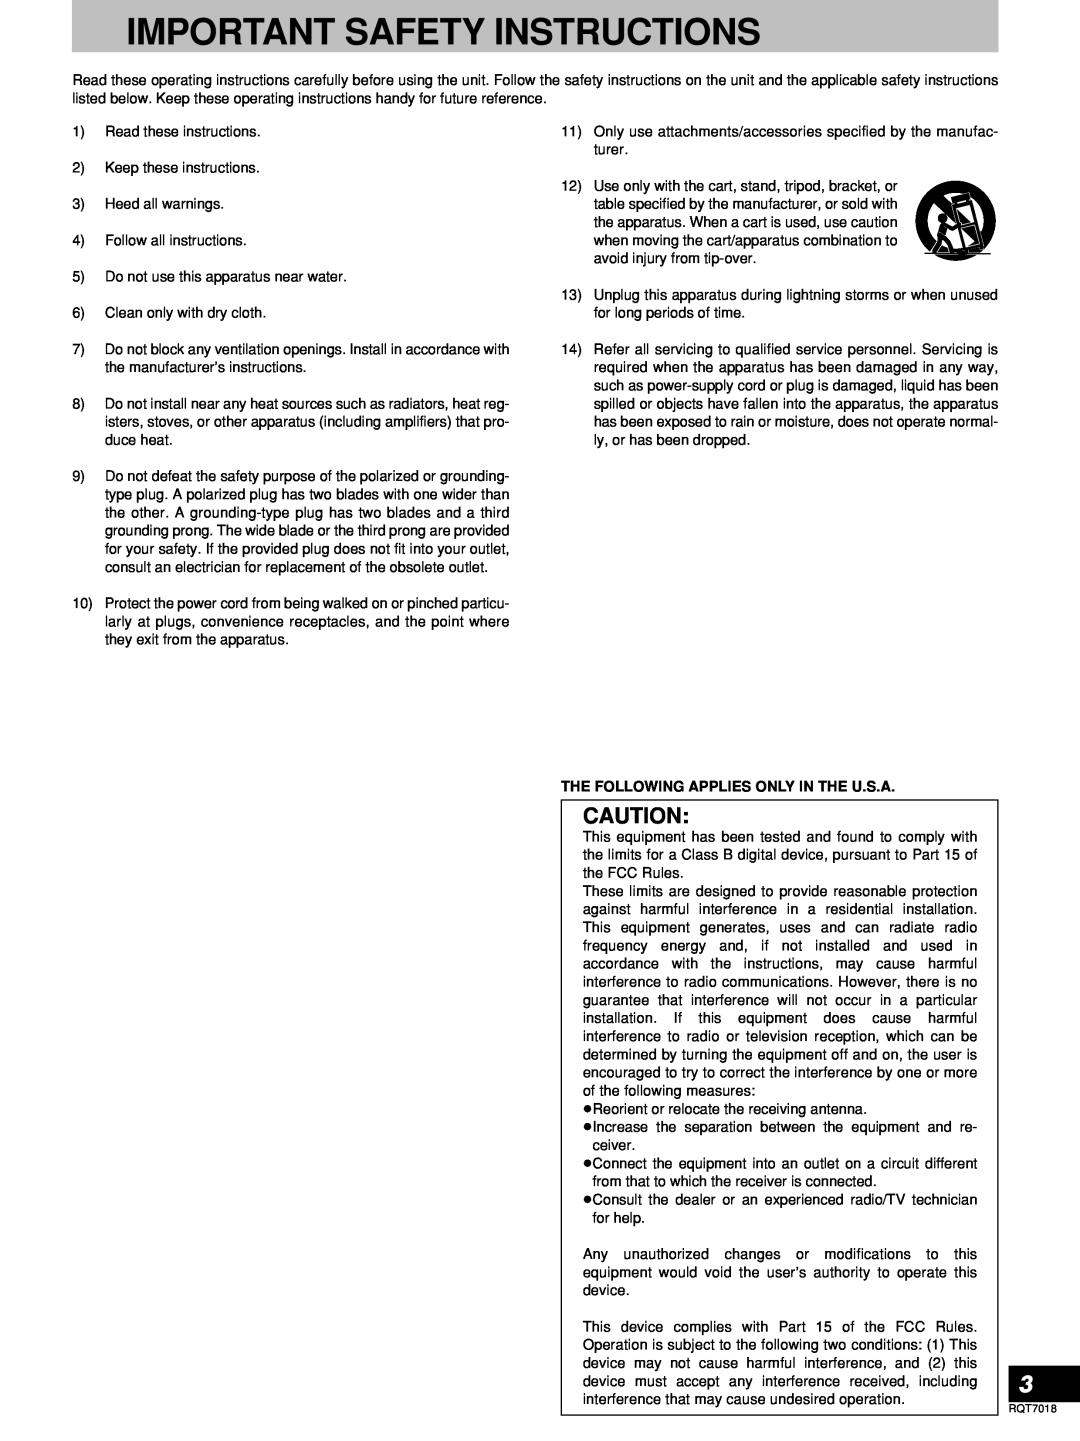 Technics SL-1200MK5, RQT7018-1Y manual Important Safety Instructions, The Following Applies Only In The U.S.A 